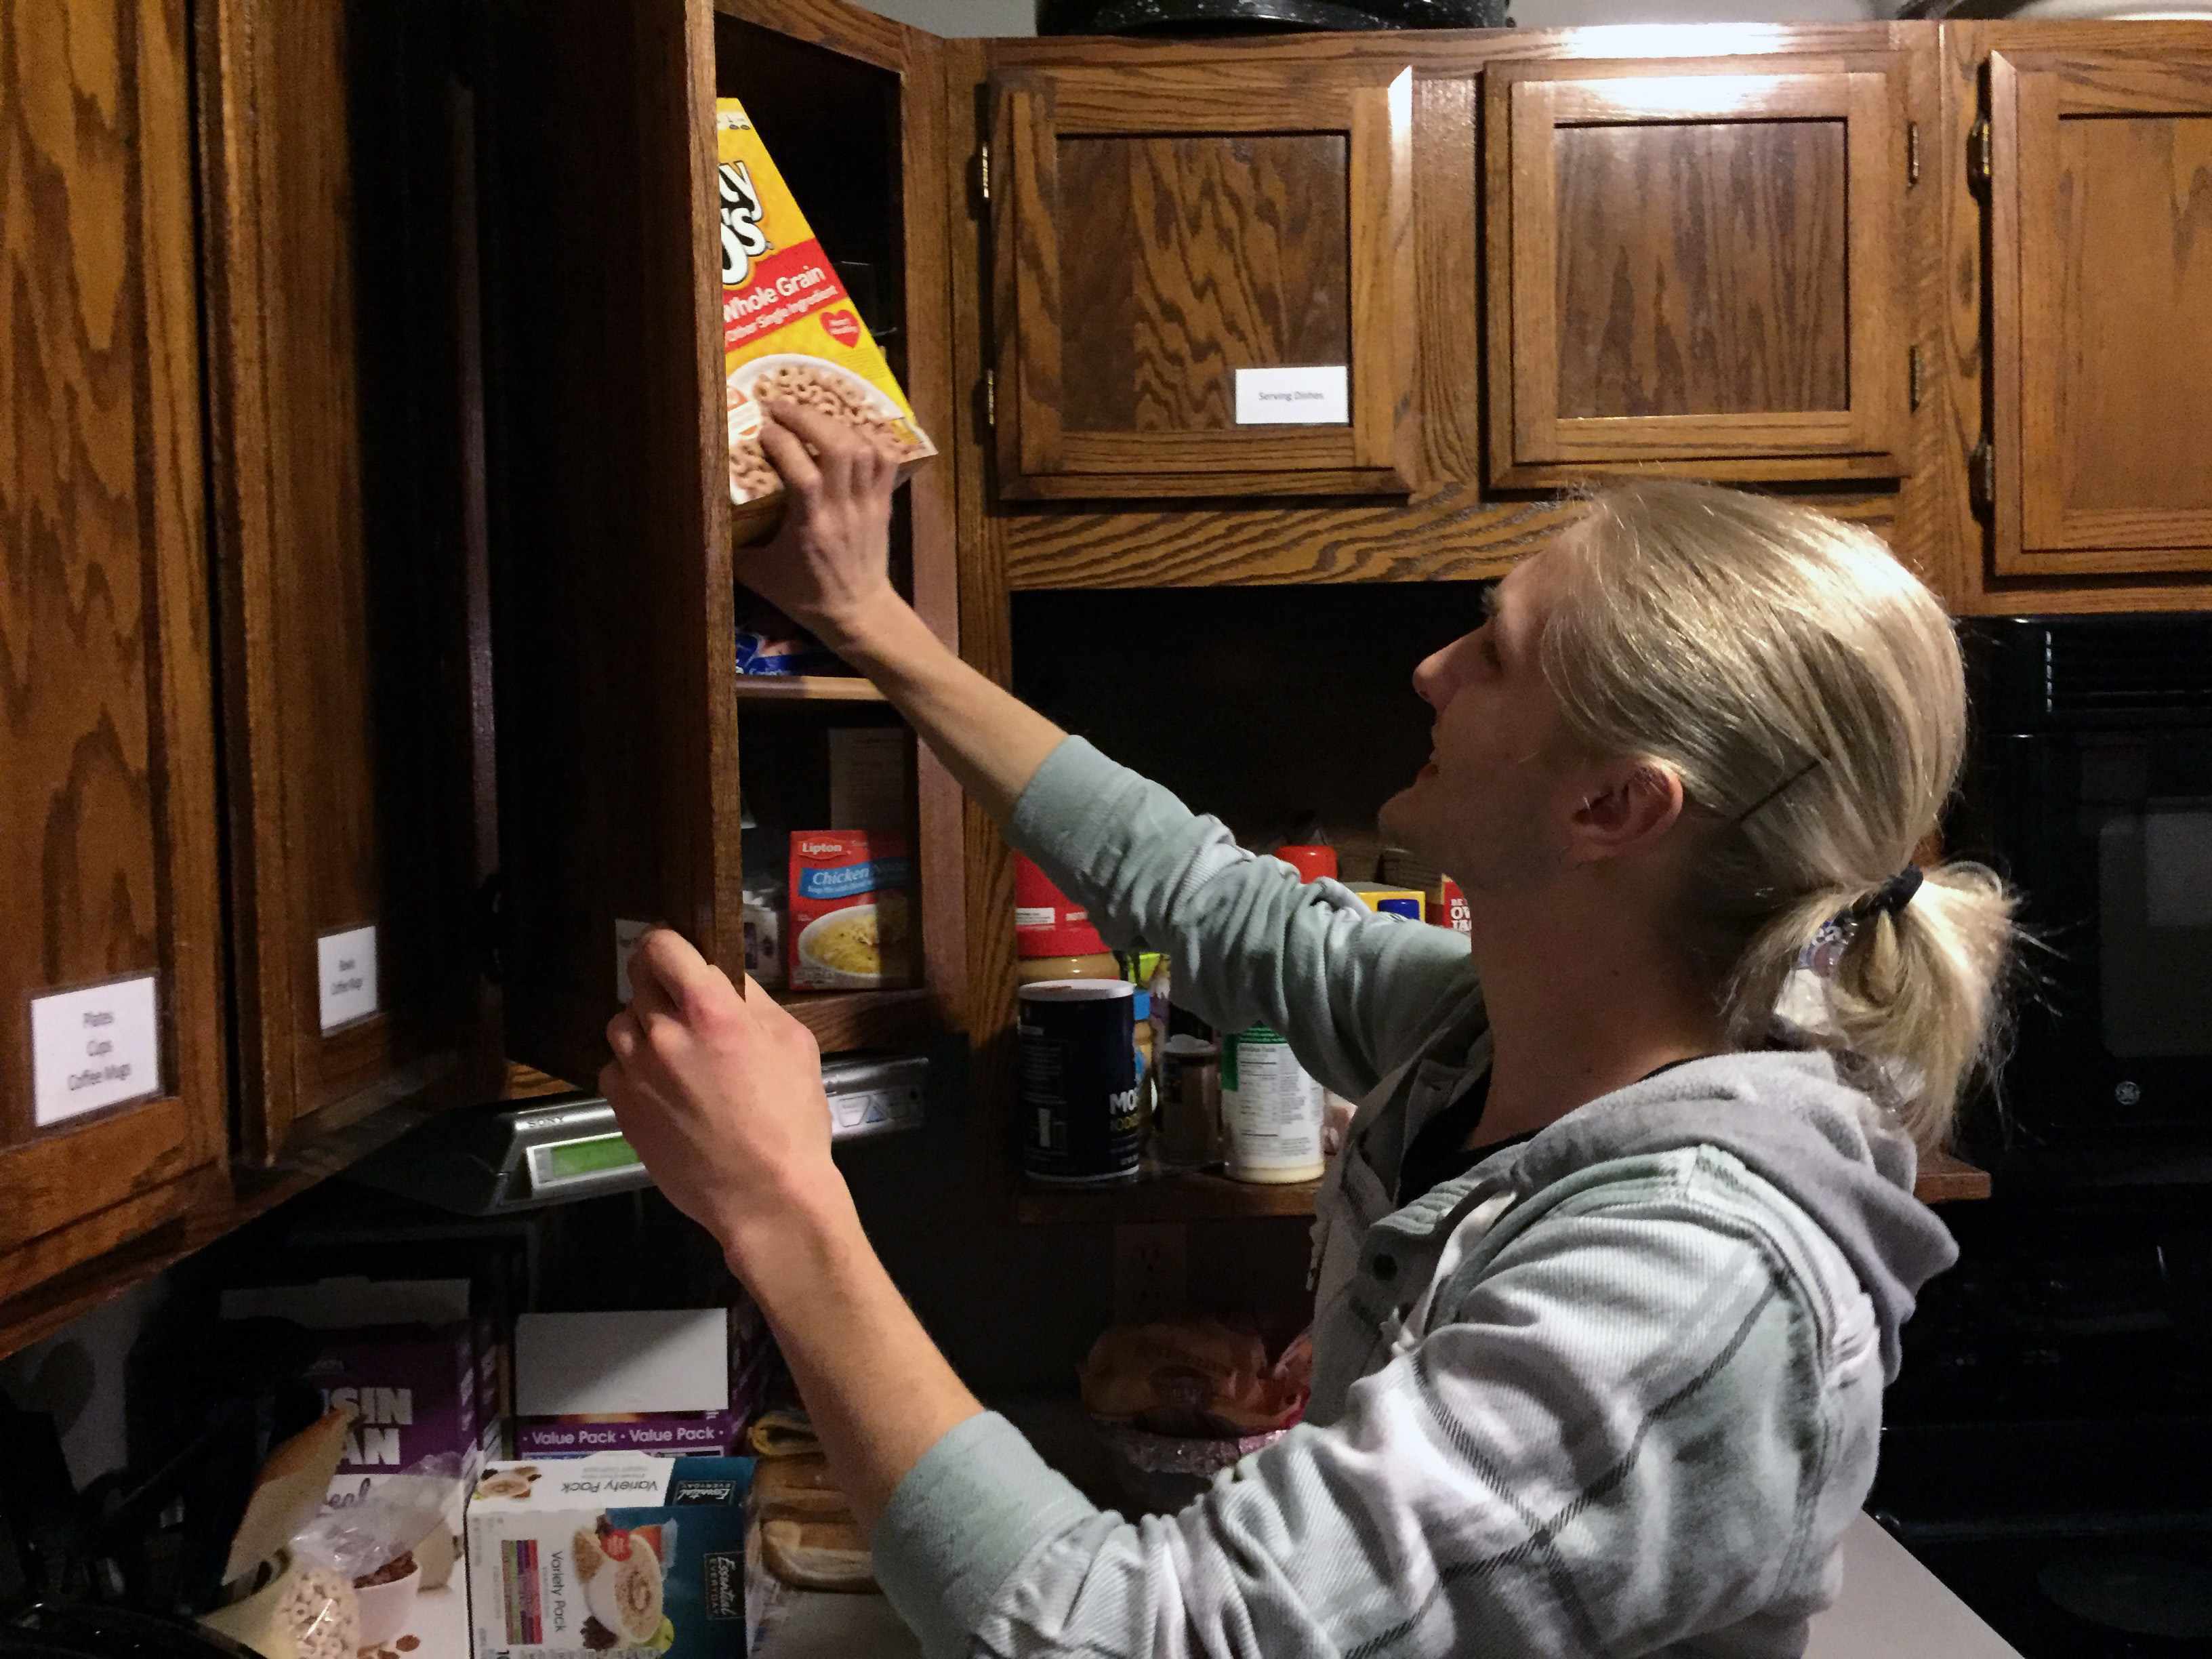 Justin Kalkes, a UW-Stout student, checks the cupboards and food supplies at Winter Haven during his volunteer shift at the overnight shelter in Menomonie.